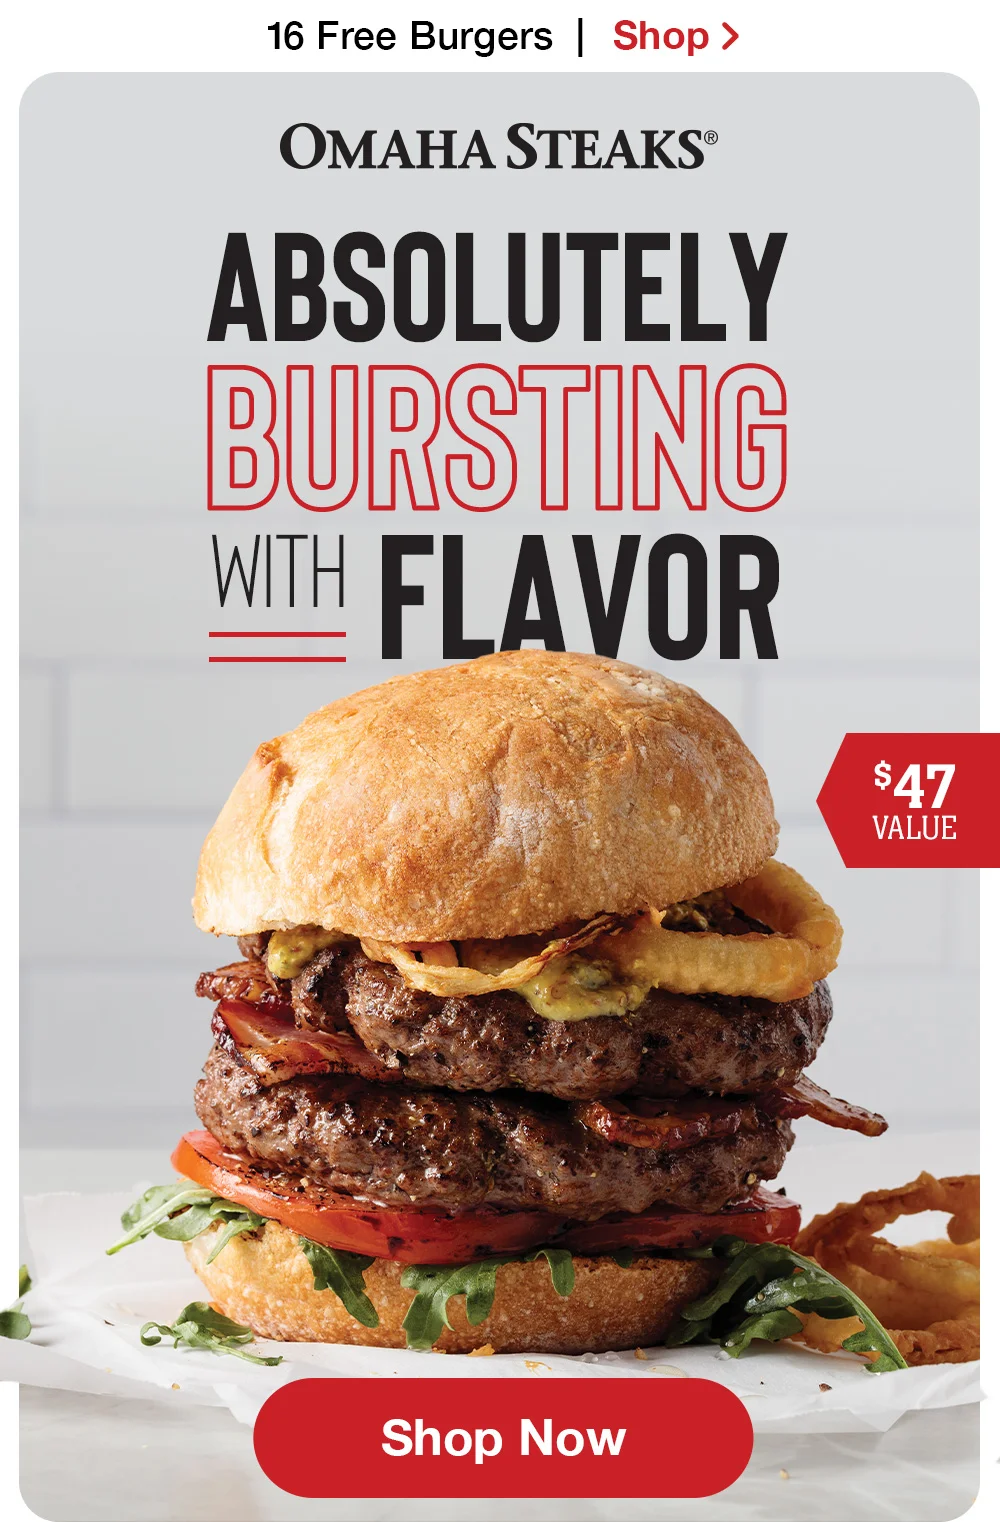 16 Free Burgers | Shop > OMAHA STEAKS® ABSOLUTELY BURSTING WITH FLAVOR | \\$47 VALUE || Shop Now